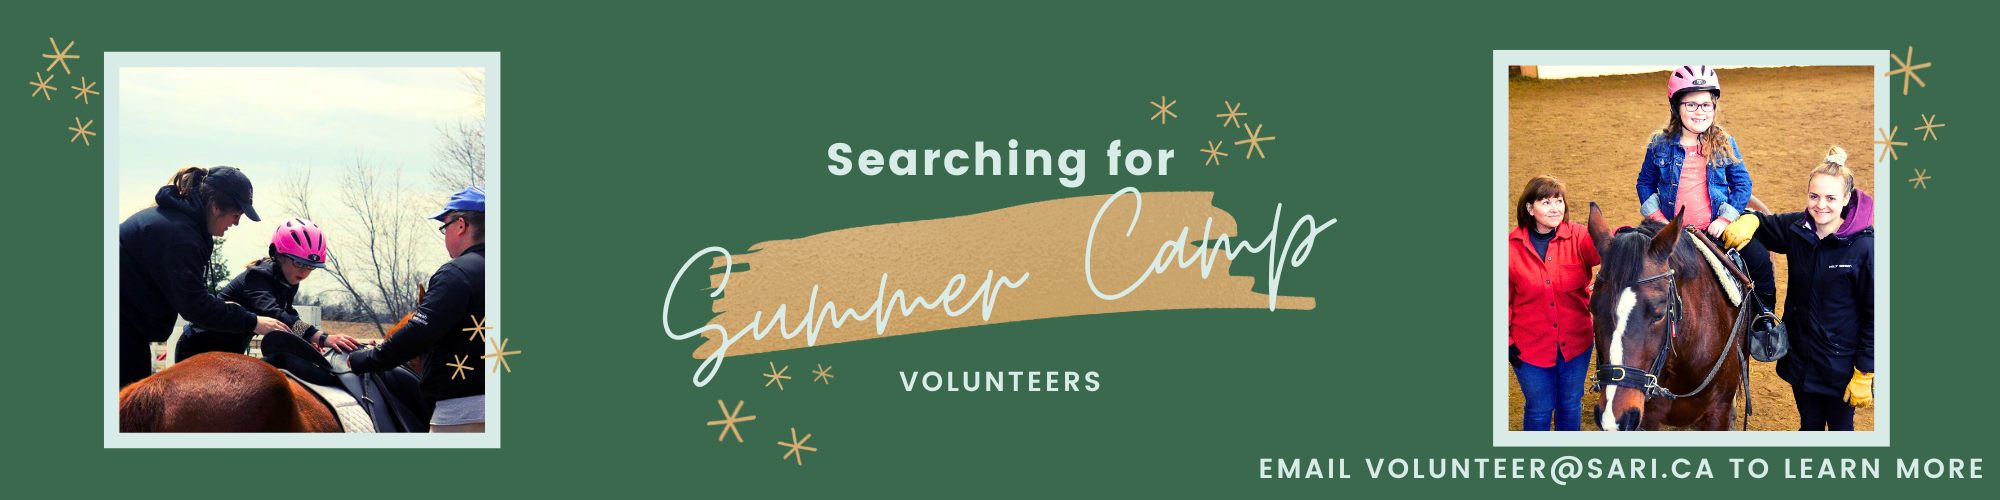 Searching for Volunteers.png